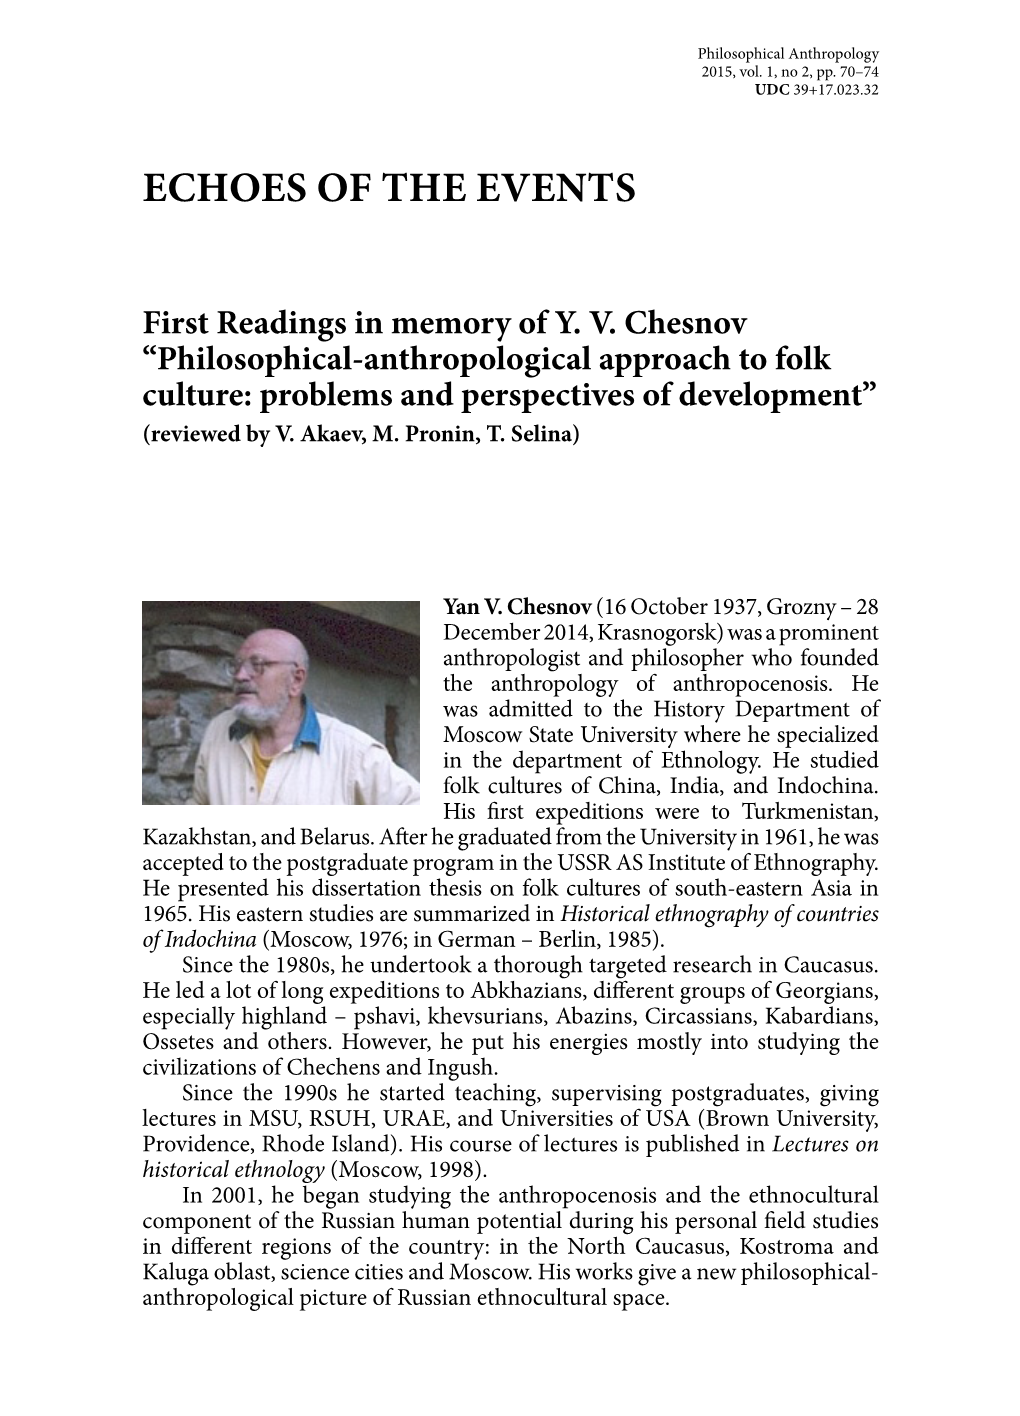 Philosophical-Anthropological Approach to Folk Culture: Problems and Perspectives of Development” (Reviewed by V